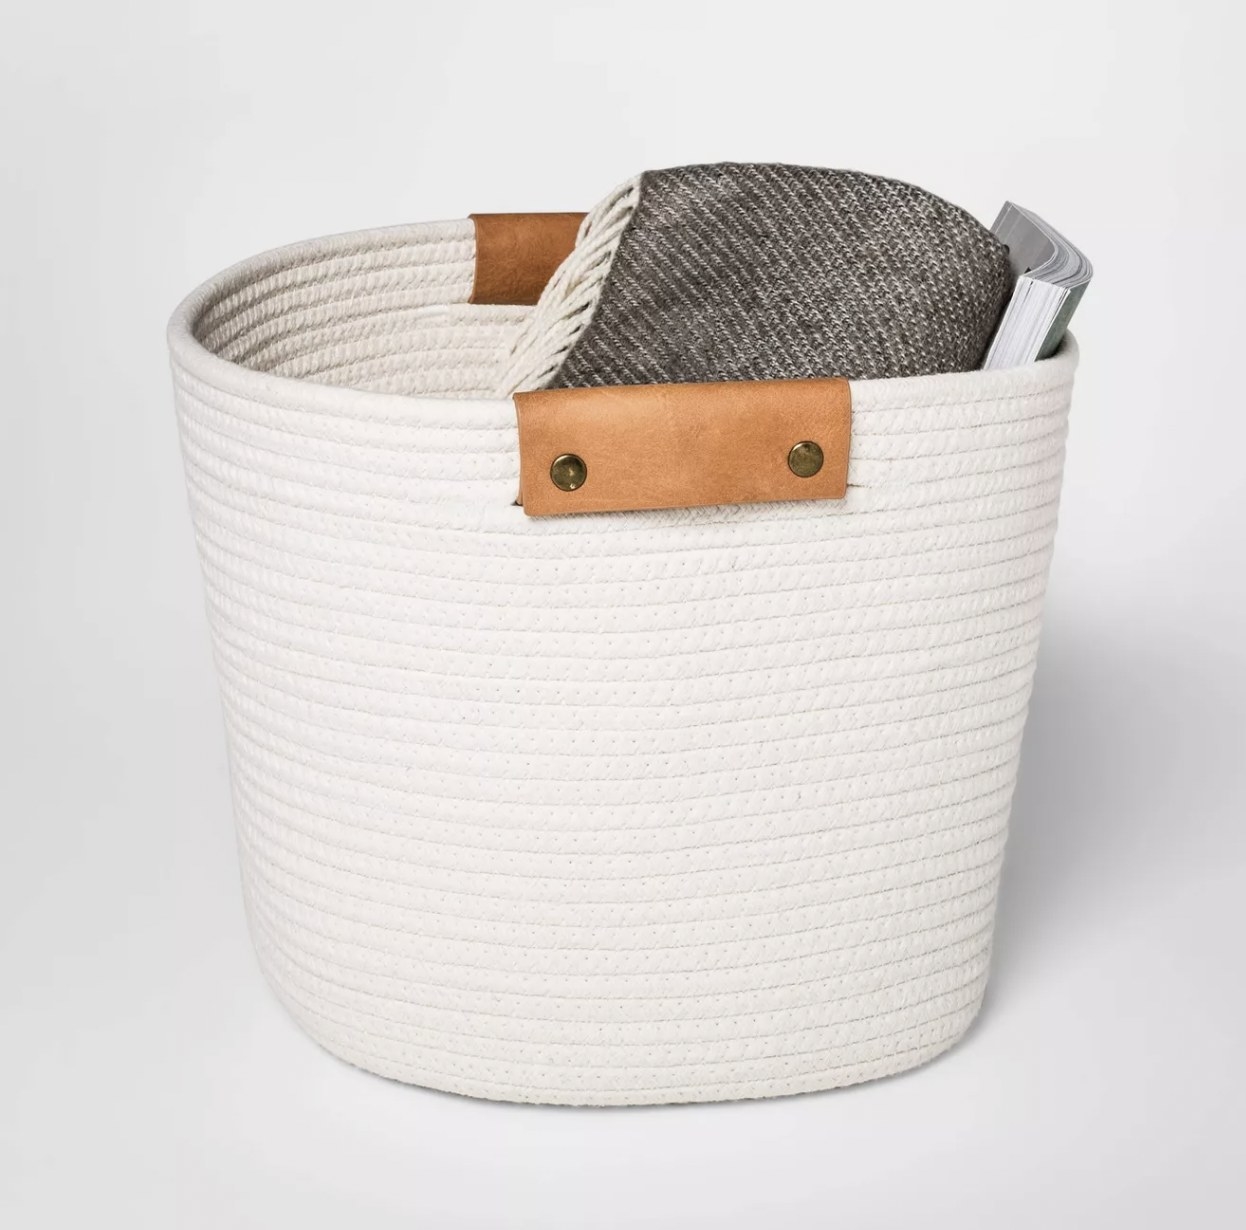 An ivory woven basket with tan leather handles